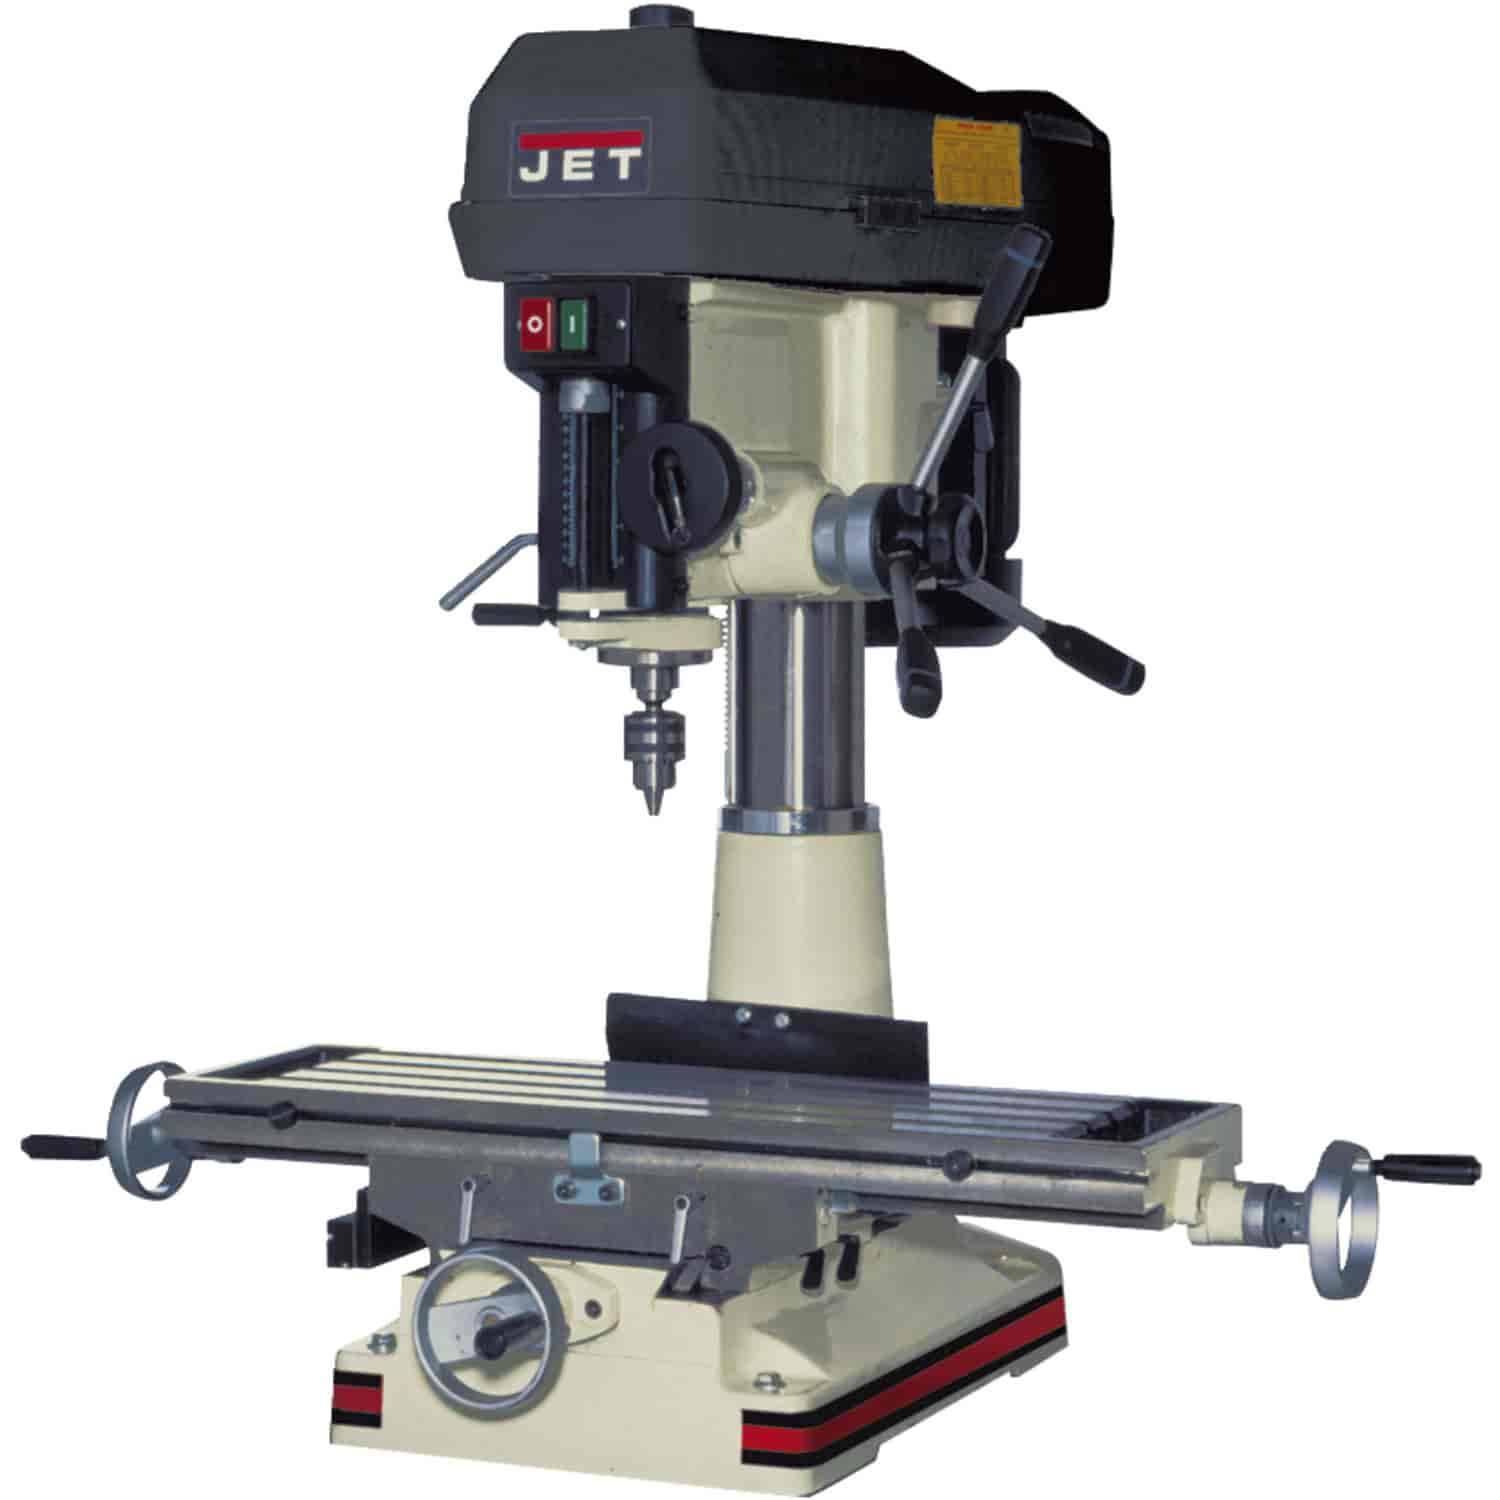 JMD-18 Mill/Drill With X-Axis Table Powerfeed